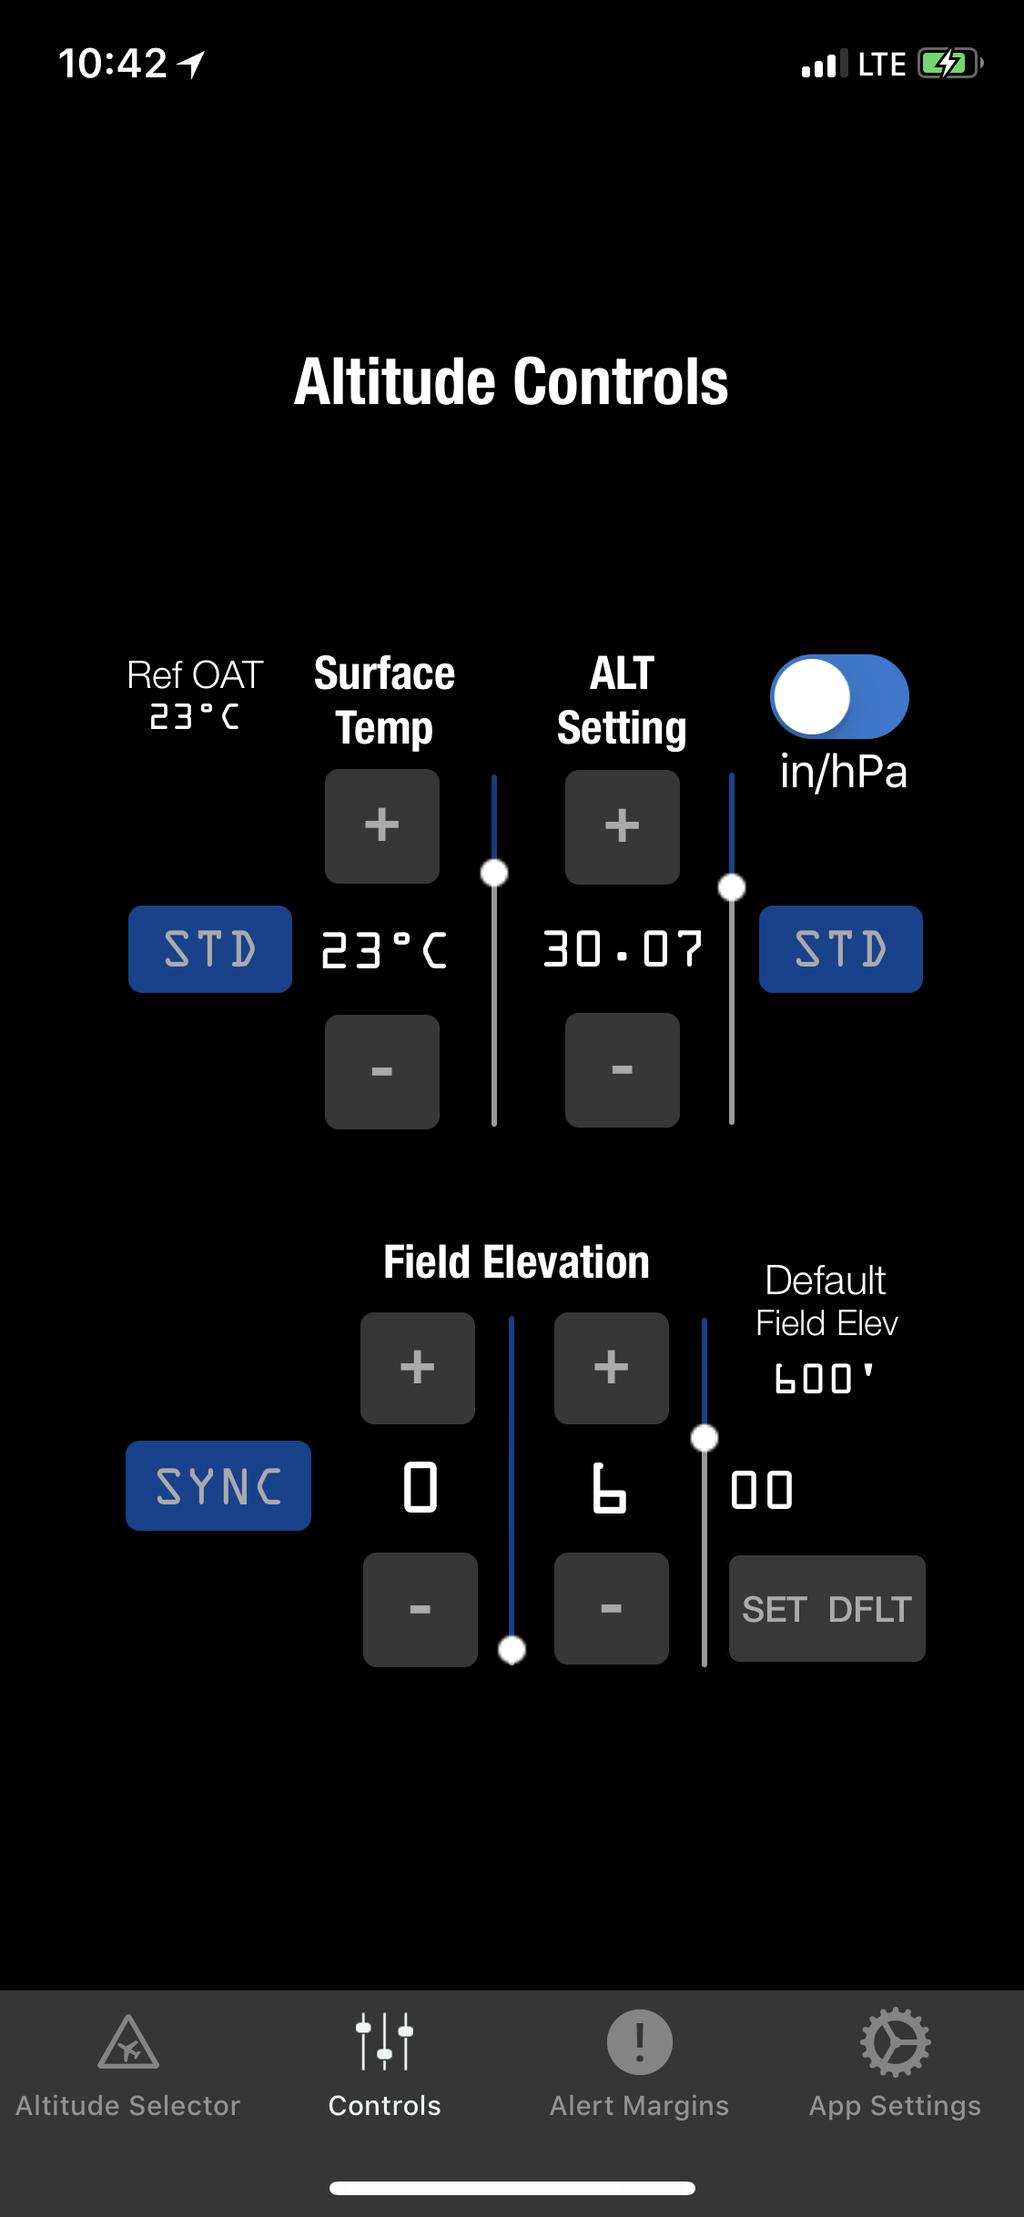 3. ALT Setting Touch Zone (Barometric Altitude Reference): An alternative way (as opposed to using the +/- buttons or data sliders) to enter data for the corresponding value types.